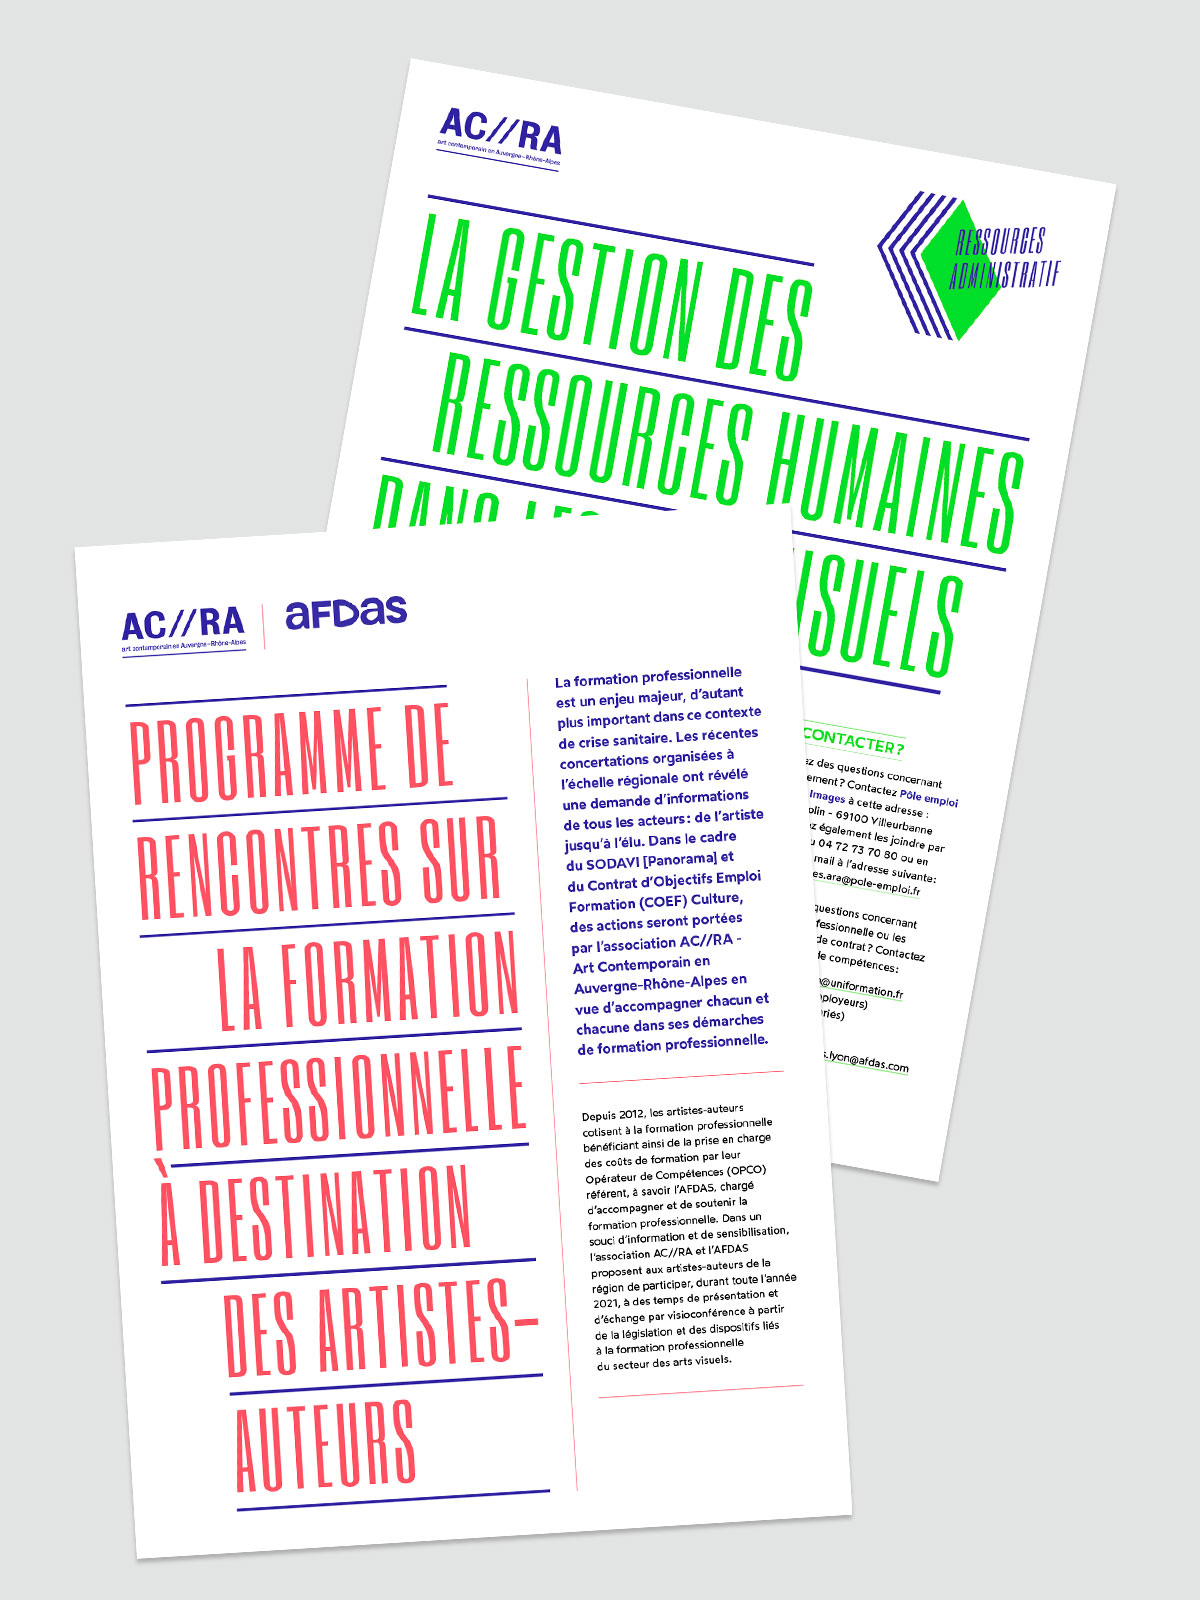 acra_ressources_formation_fiches_1_2.jpg